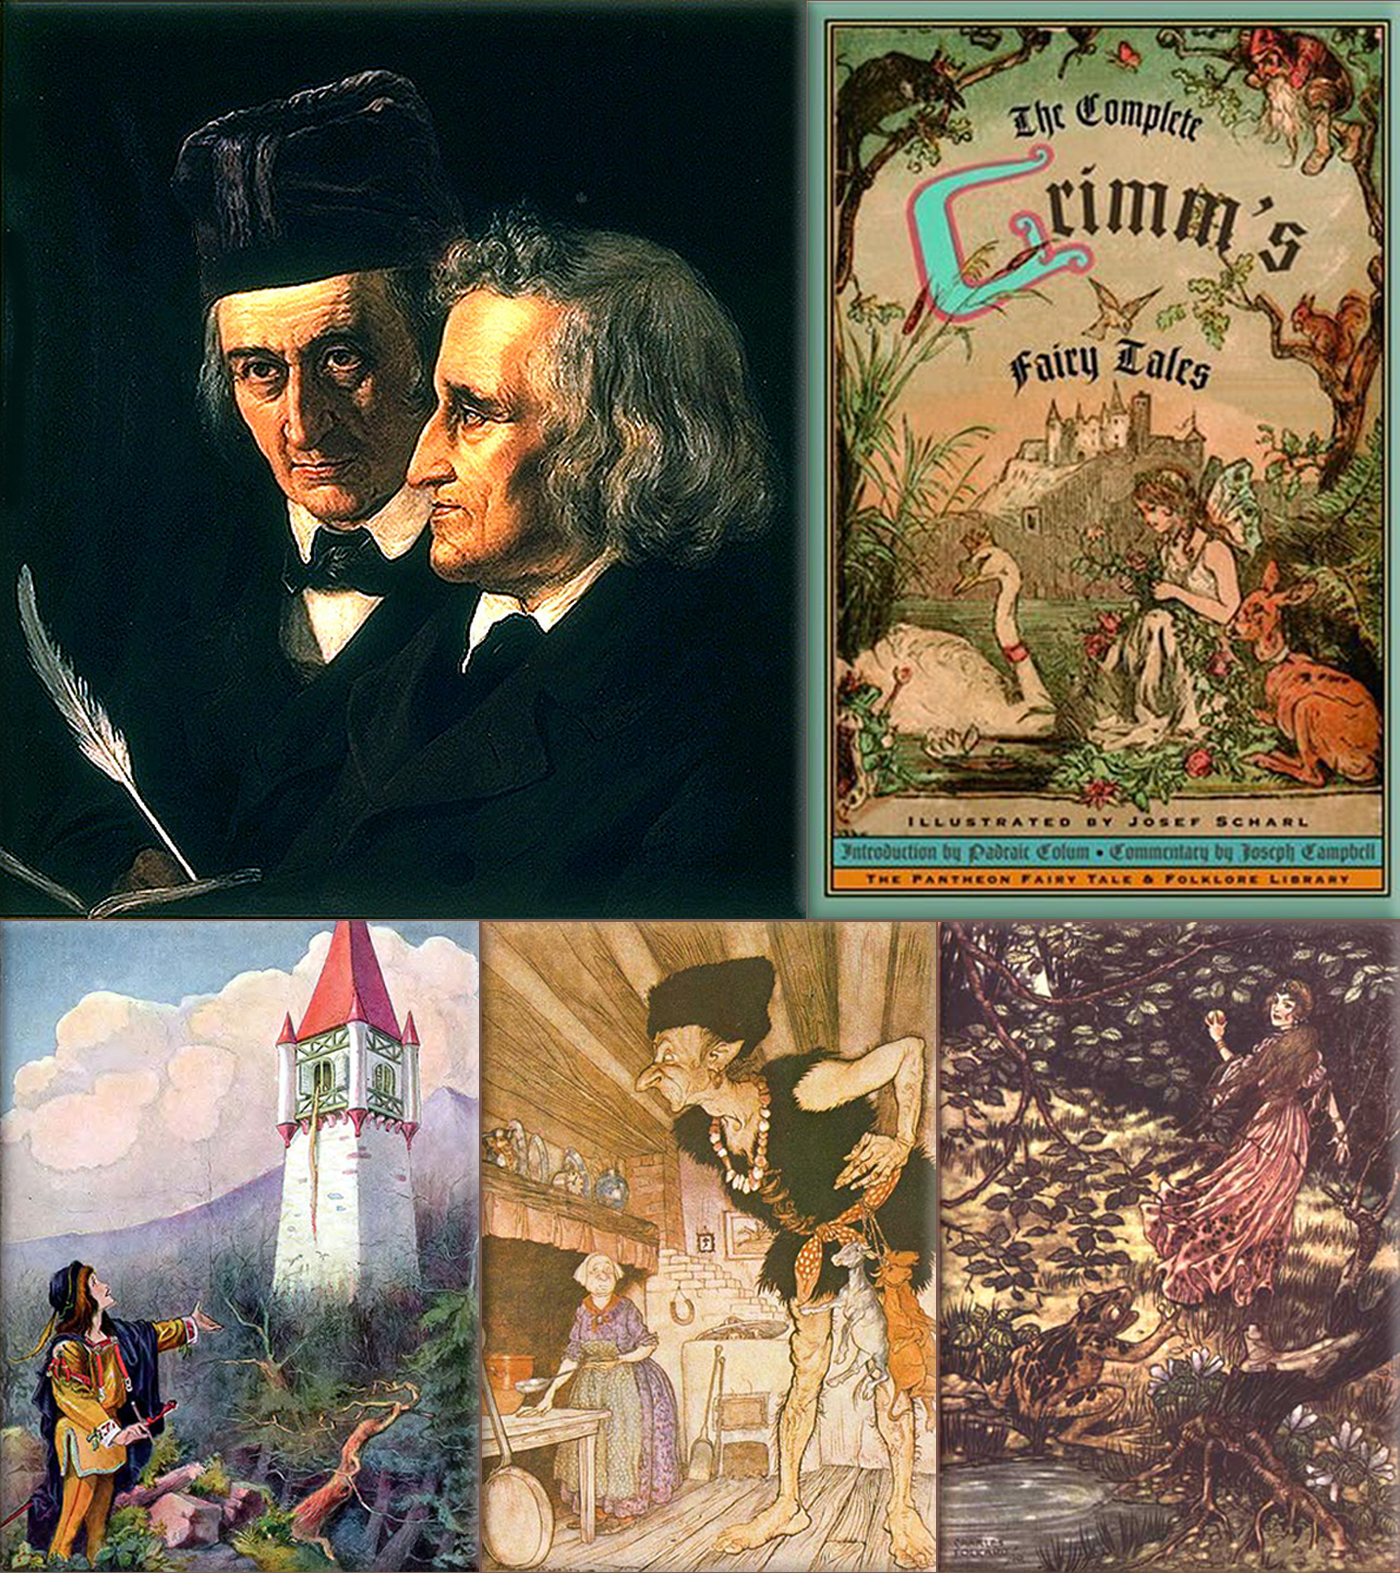 Grimm’s Fairy Tales first publication on December 20th, 1812.